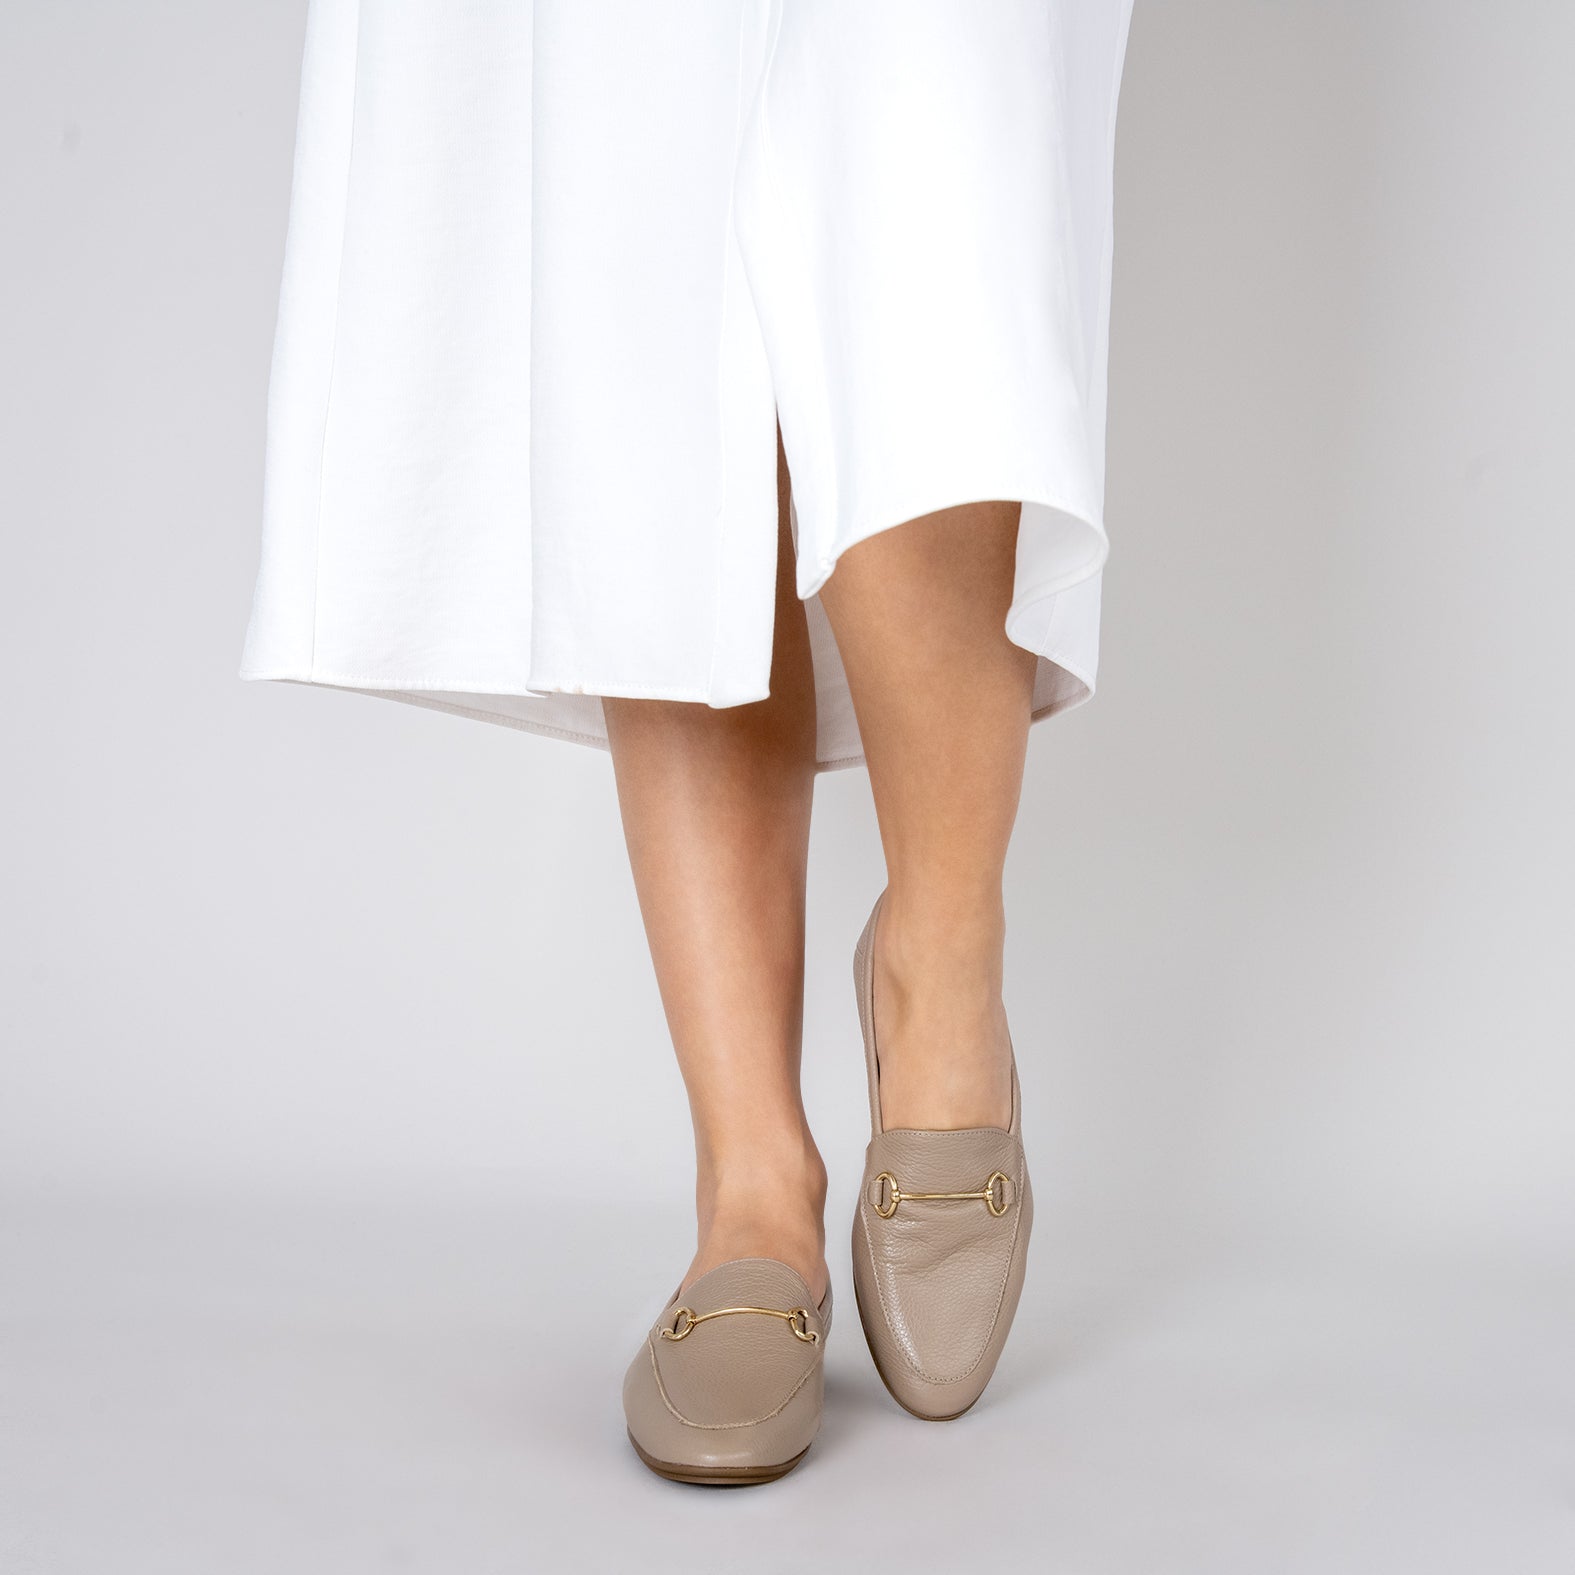 STYLE – TAUPE moccasins with horsebit